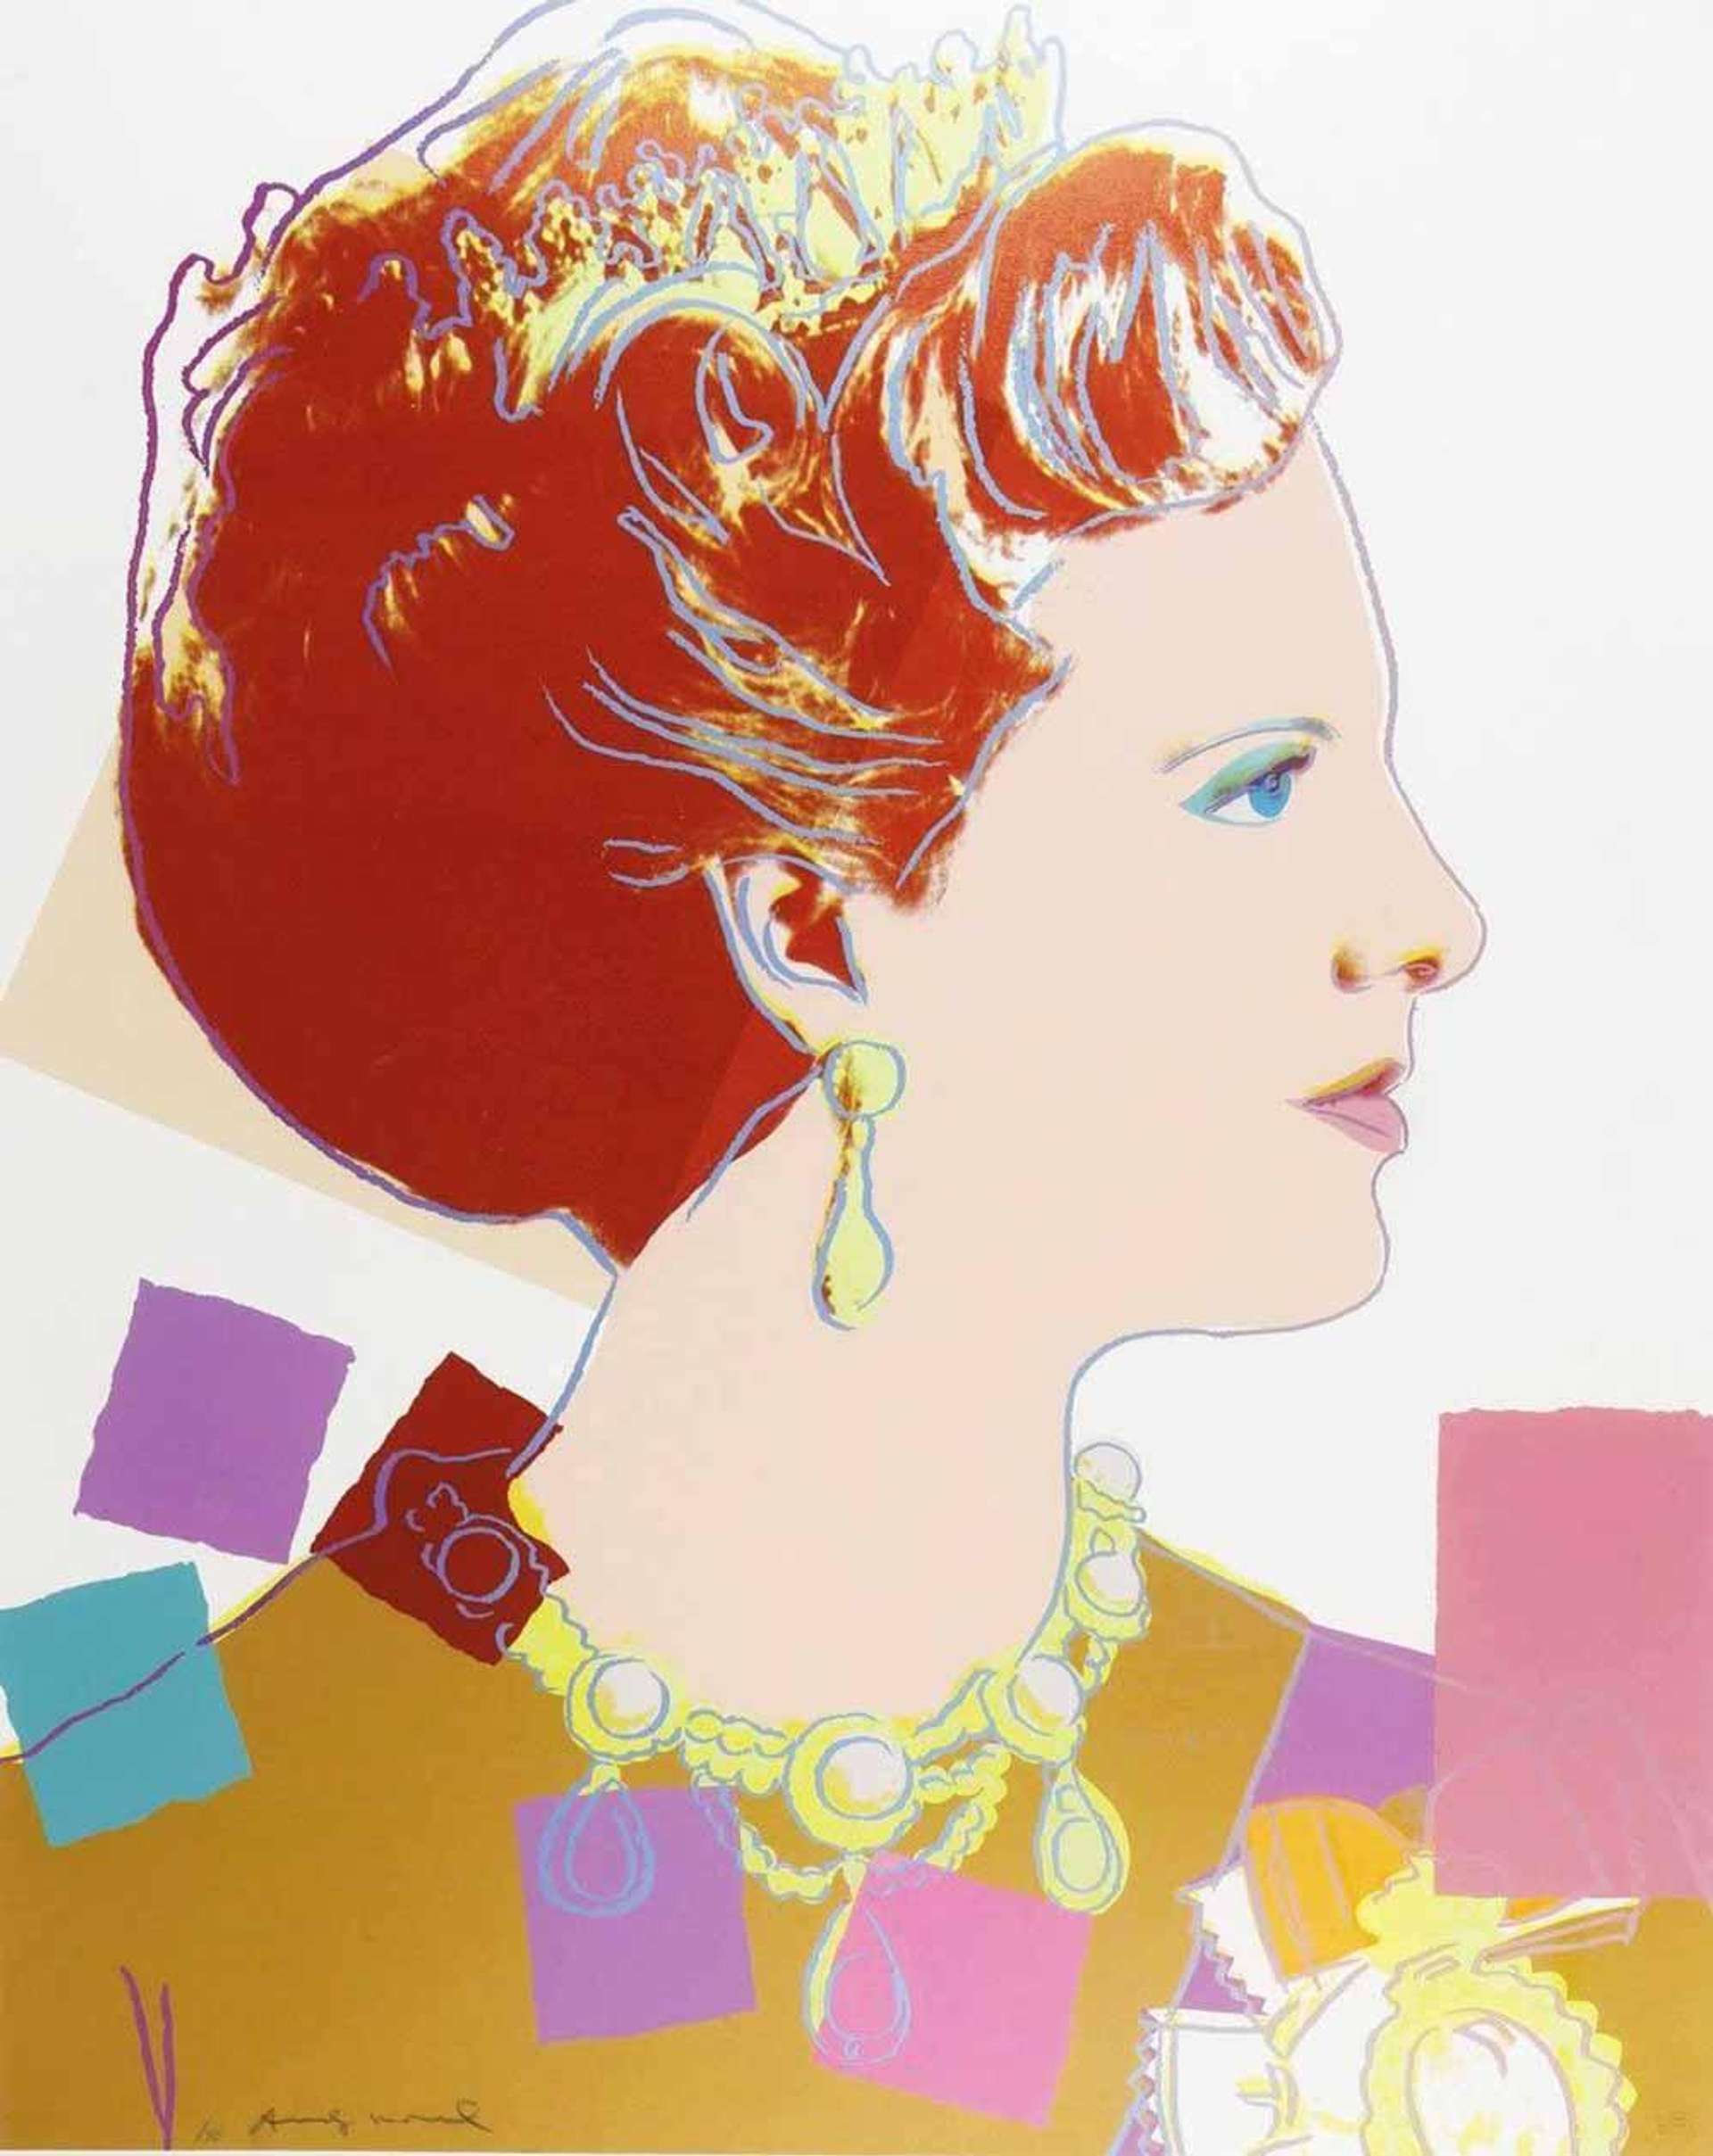 Queen Margrethe Of Denmark Royal Edition (F. & S. II.344A) - Signed Print by Andy Warhol 1985 - MyArtBroker